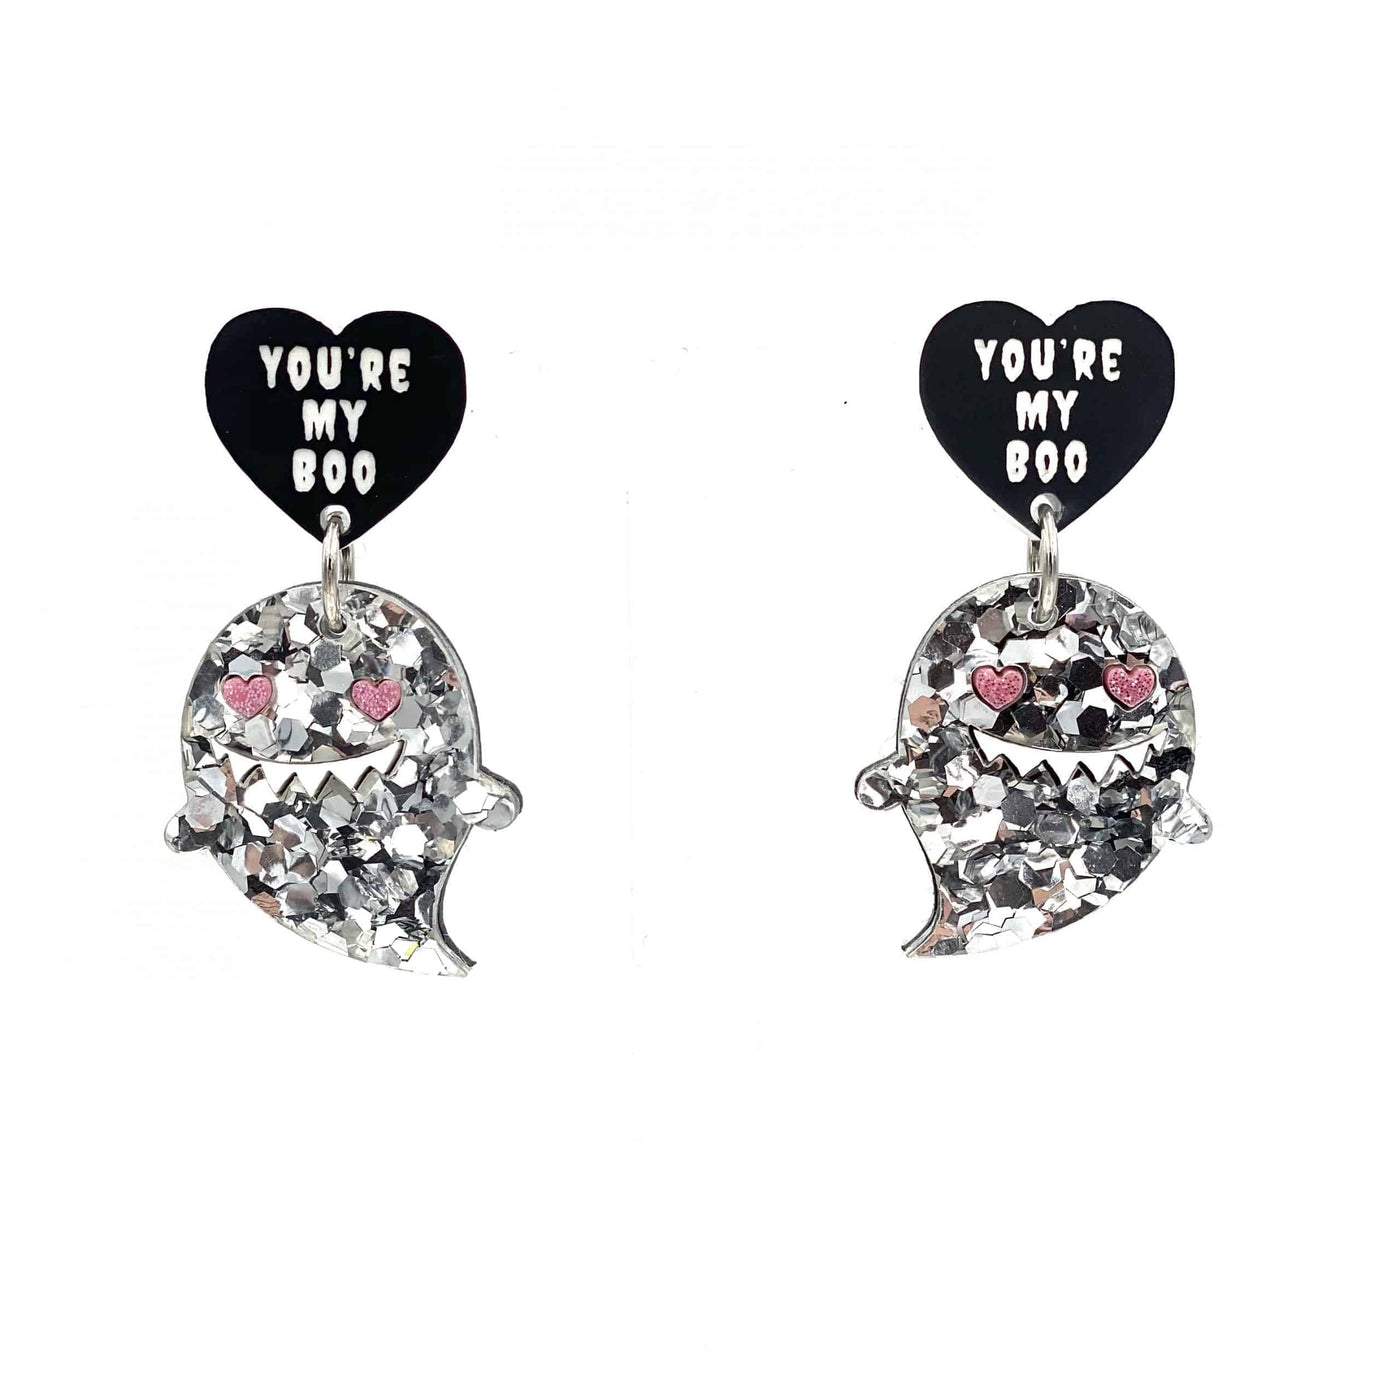 Haus of Dizzy 'You're My Boo' Limited Edition Earrings